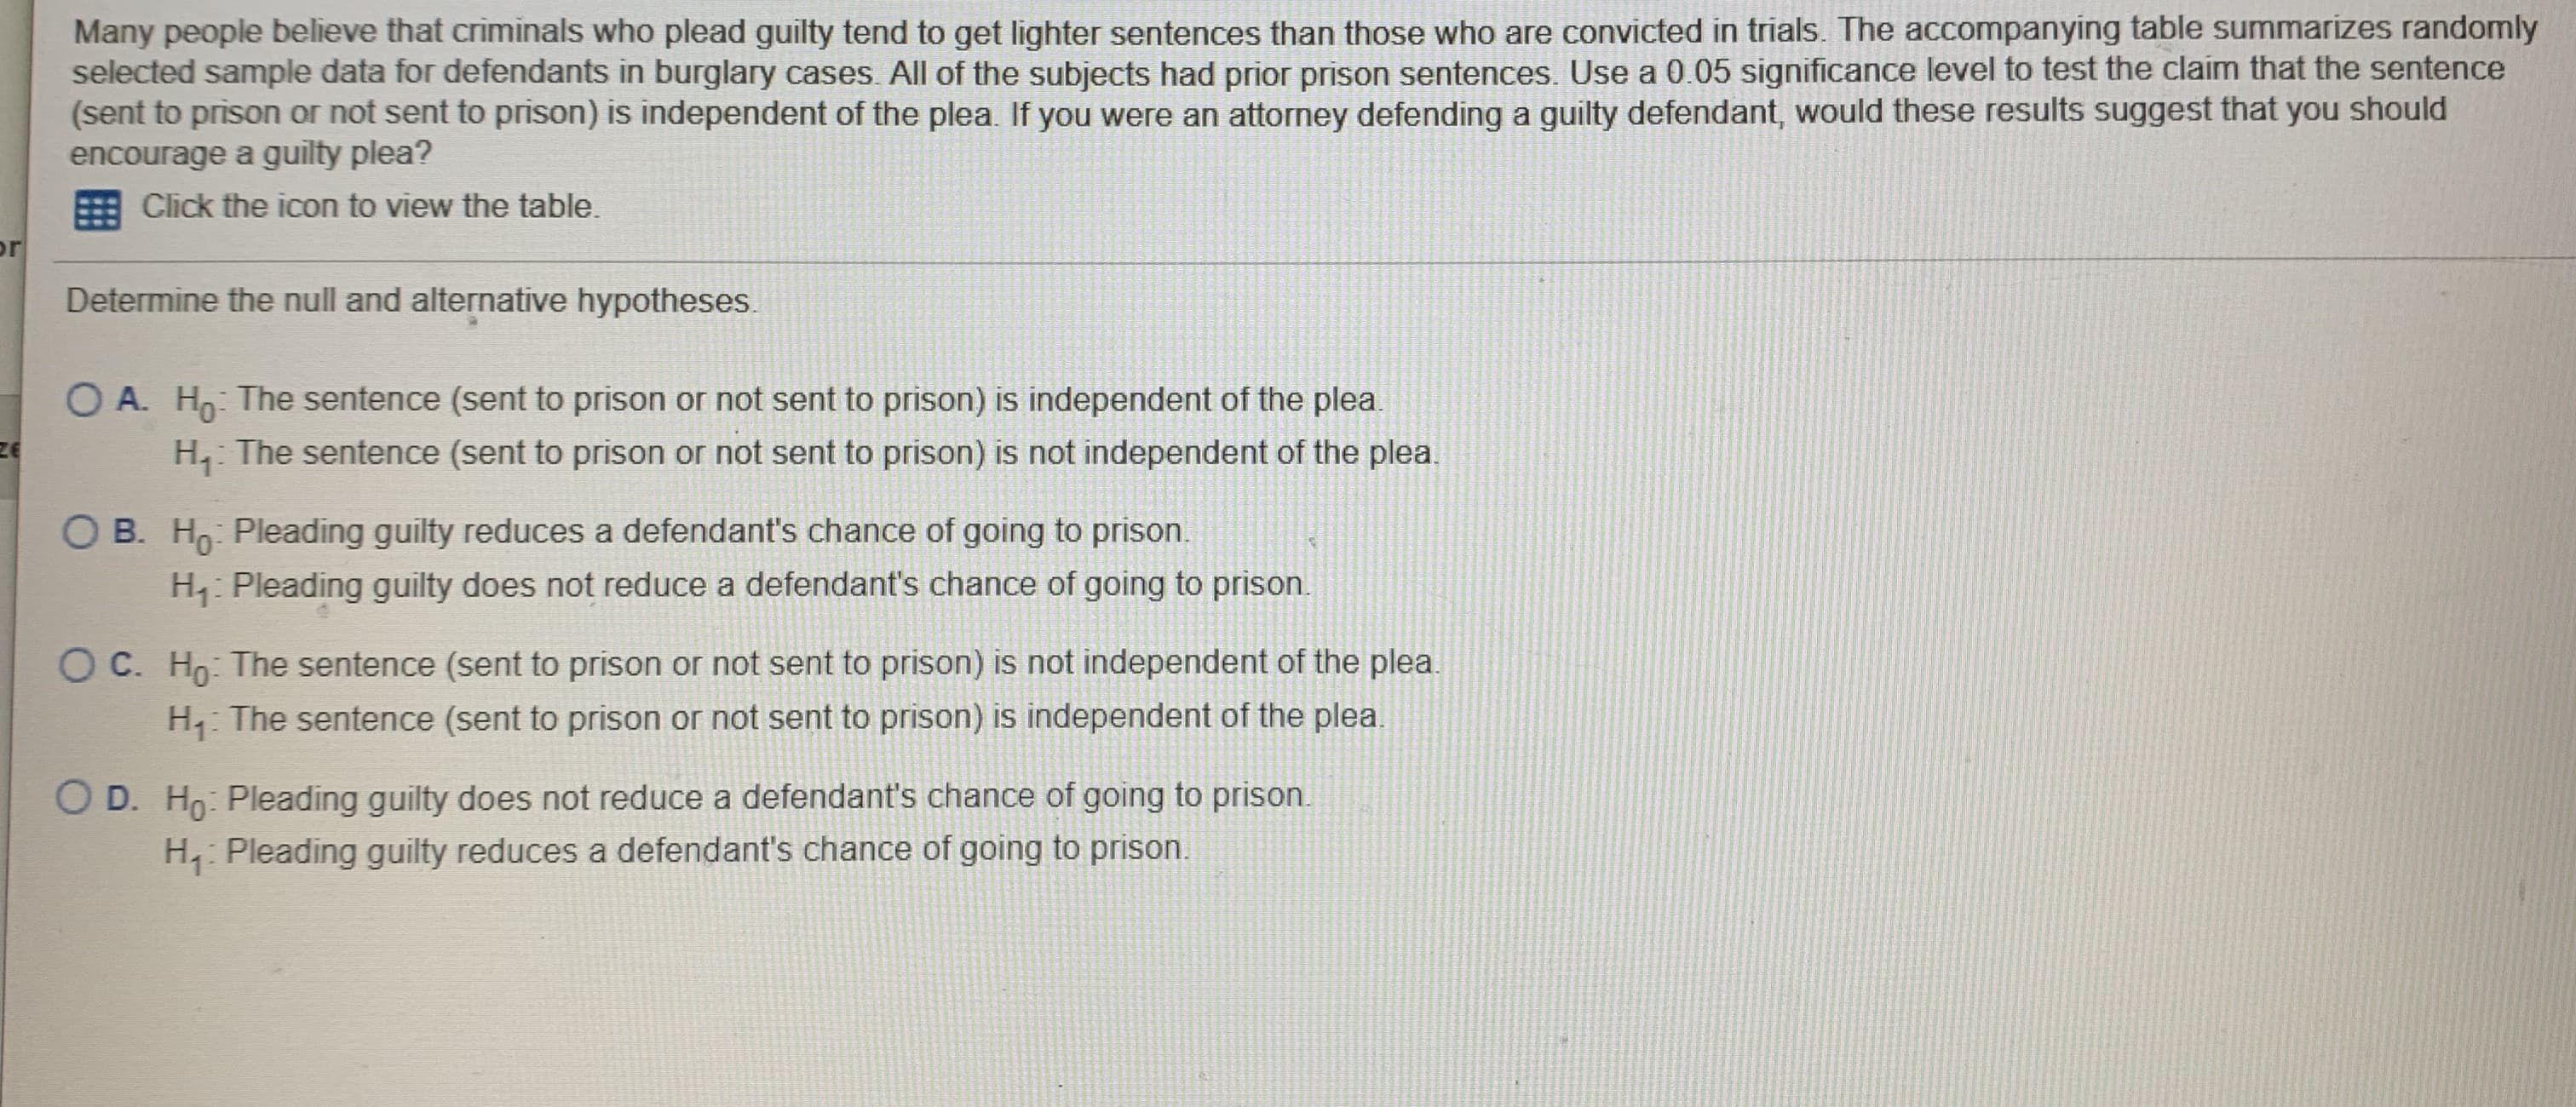 Many people believe that criminals who plead guilty tend to get lighter sentences than those who are convicted in trials. The accompanying table summarizes randomly
selected sample data for defendants in burglary cases. All of the subjects had prior prison sentences. Use a 0.05 significance level to test the claim that the sentence
(sent to prison or not sent to prison) is independent of the plea. If you were an attorney defending a guilty defendant, would these results suggest that you should
encourage a guilty plea?
Click the icon to view the table.
or
Determine the null and alternative hypotheses.
O A. H: The sentence (sent to prison or not sent to prison) is independent of the plea
H,: The sentence (sent to prison or not sent to prison) is not independent of the plea.
O B. H: Pleading guilty reduces a defendant's chance of going to prison.
H: Pleading guilty does not reduce a defendant's chance of going to prison.
OC. Ho: The sentence (sent to prison or not sent to prison) is not independent of the plea.
H, The sentence (sent to prison or not sent to prison) is independent of the plea.
D. Ho: Pleading guilty does not reduce a defendant's chance of going to prison.
H, Pleading guilty reduces a defendant's chance of going to prison.
